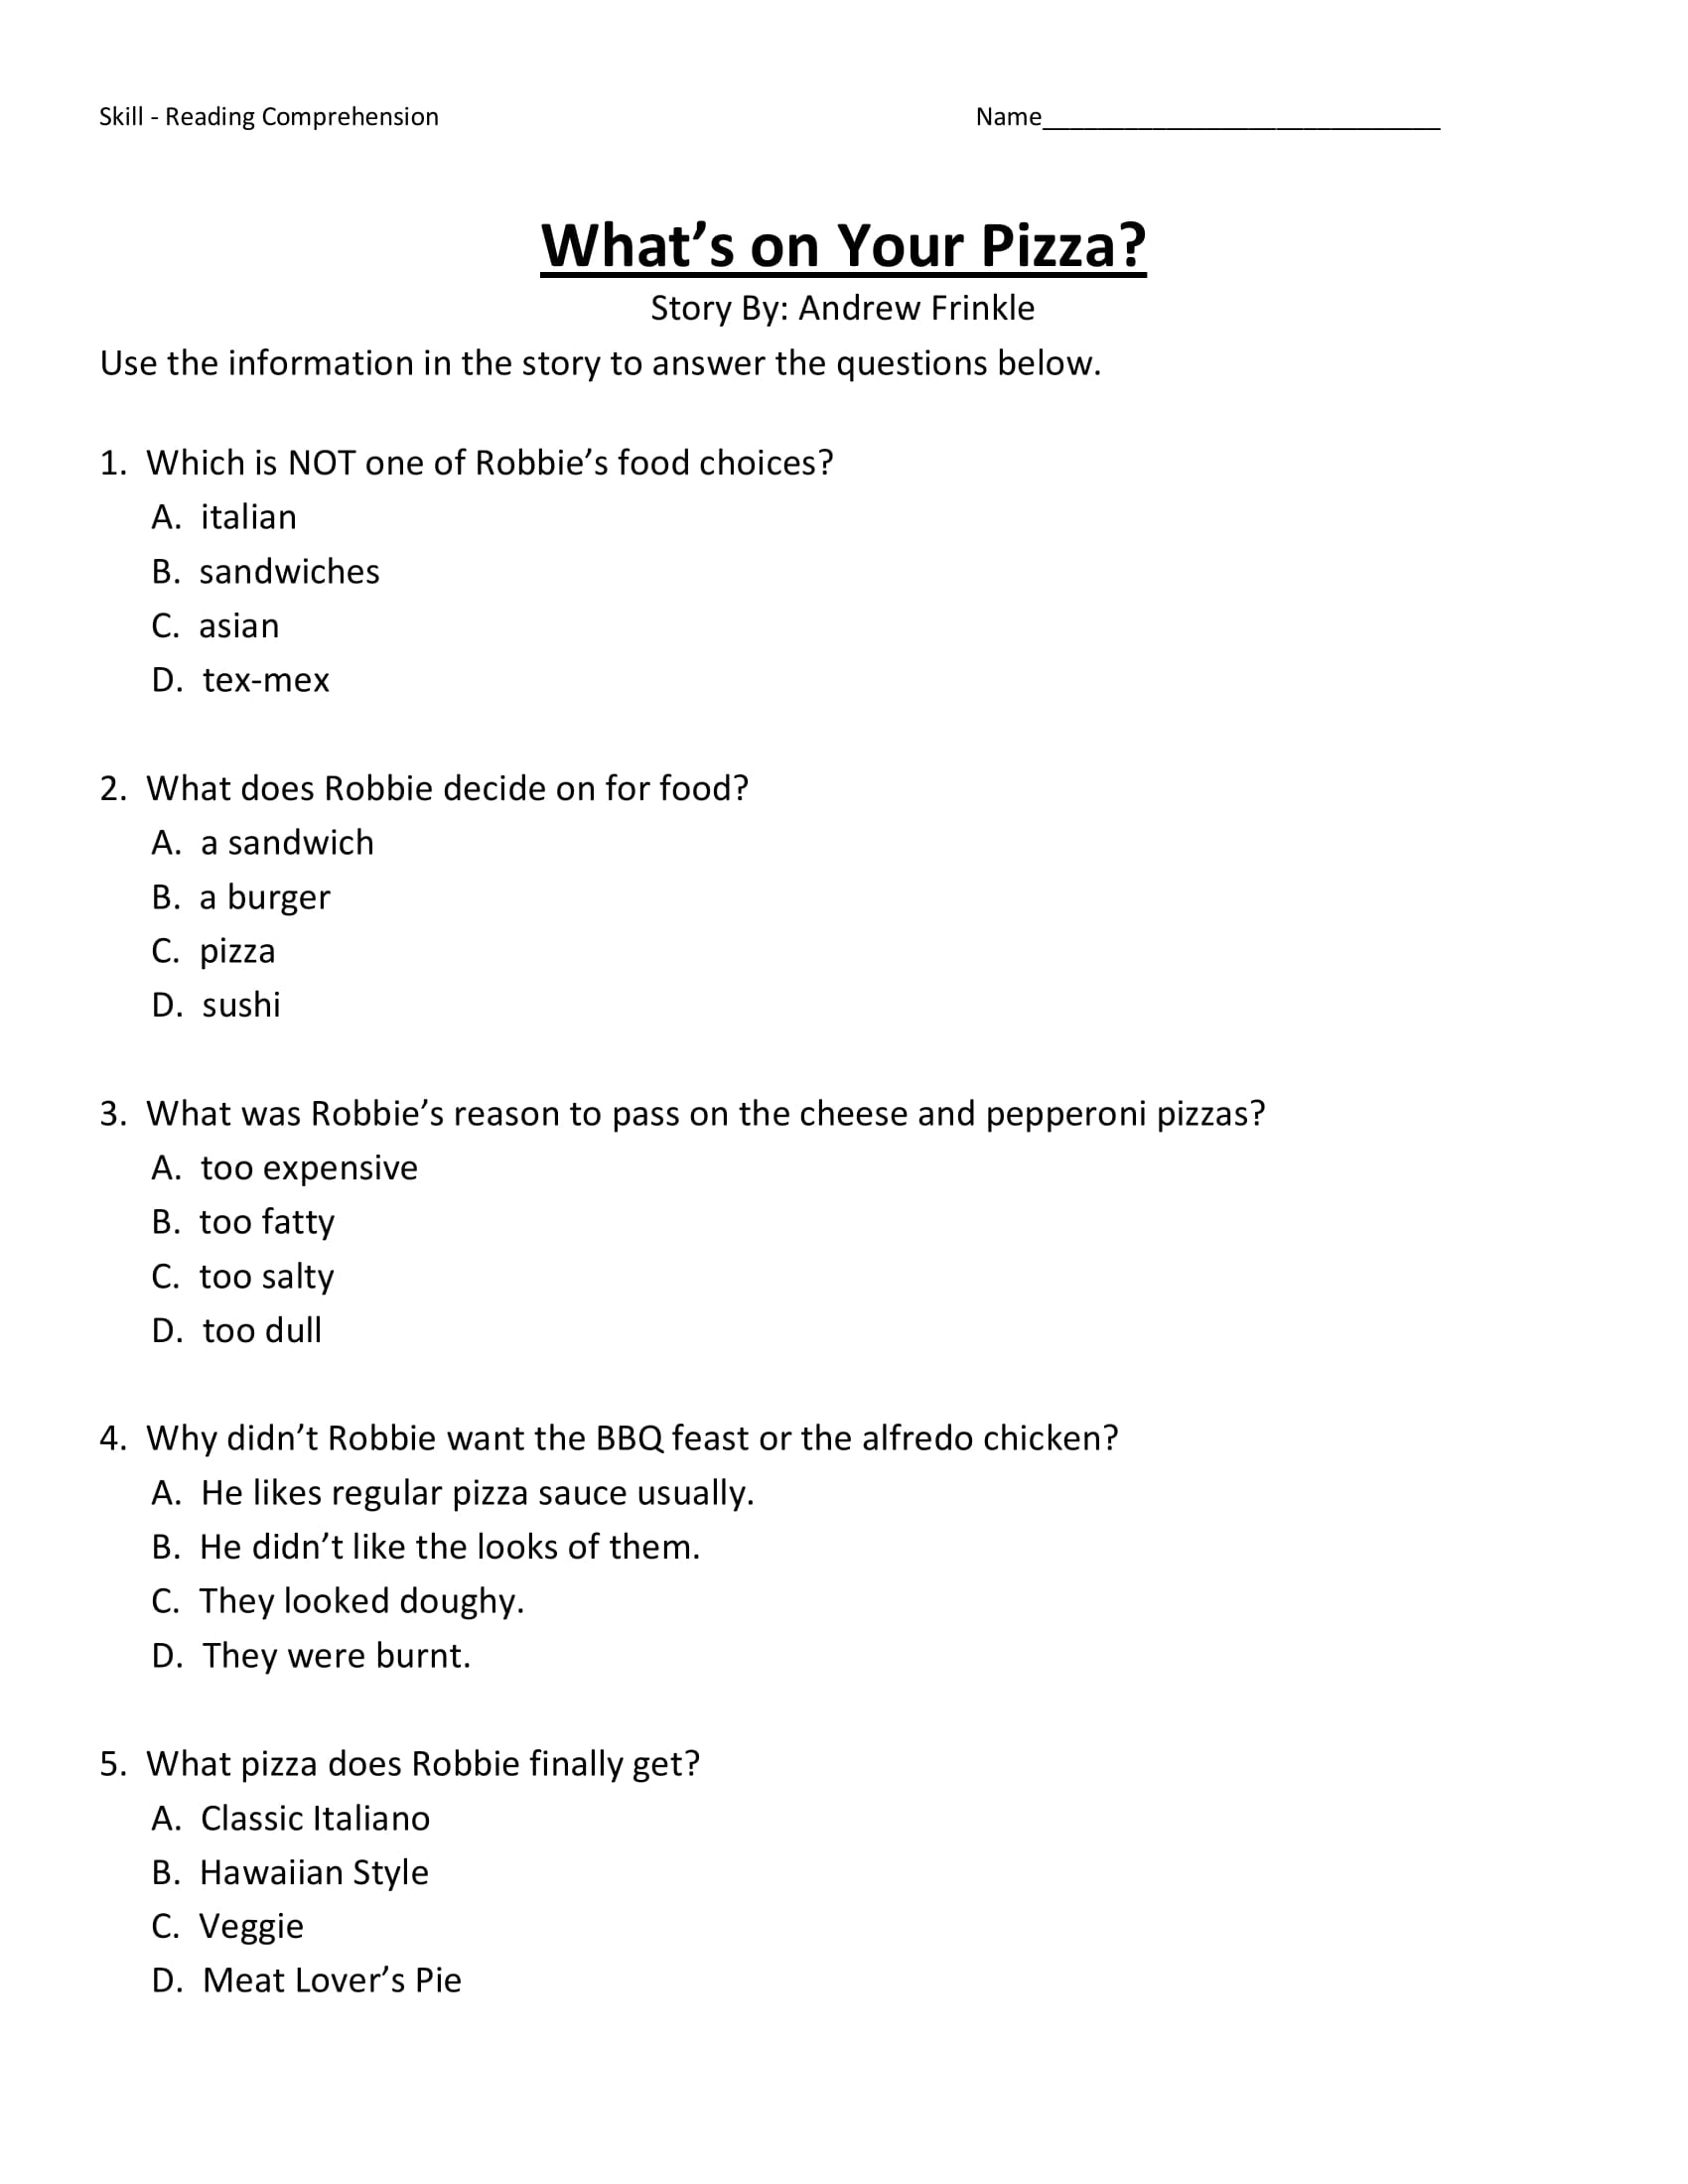 science reading comprehension worksheets 4th grade in this series